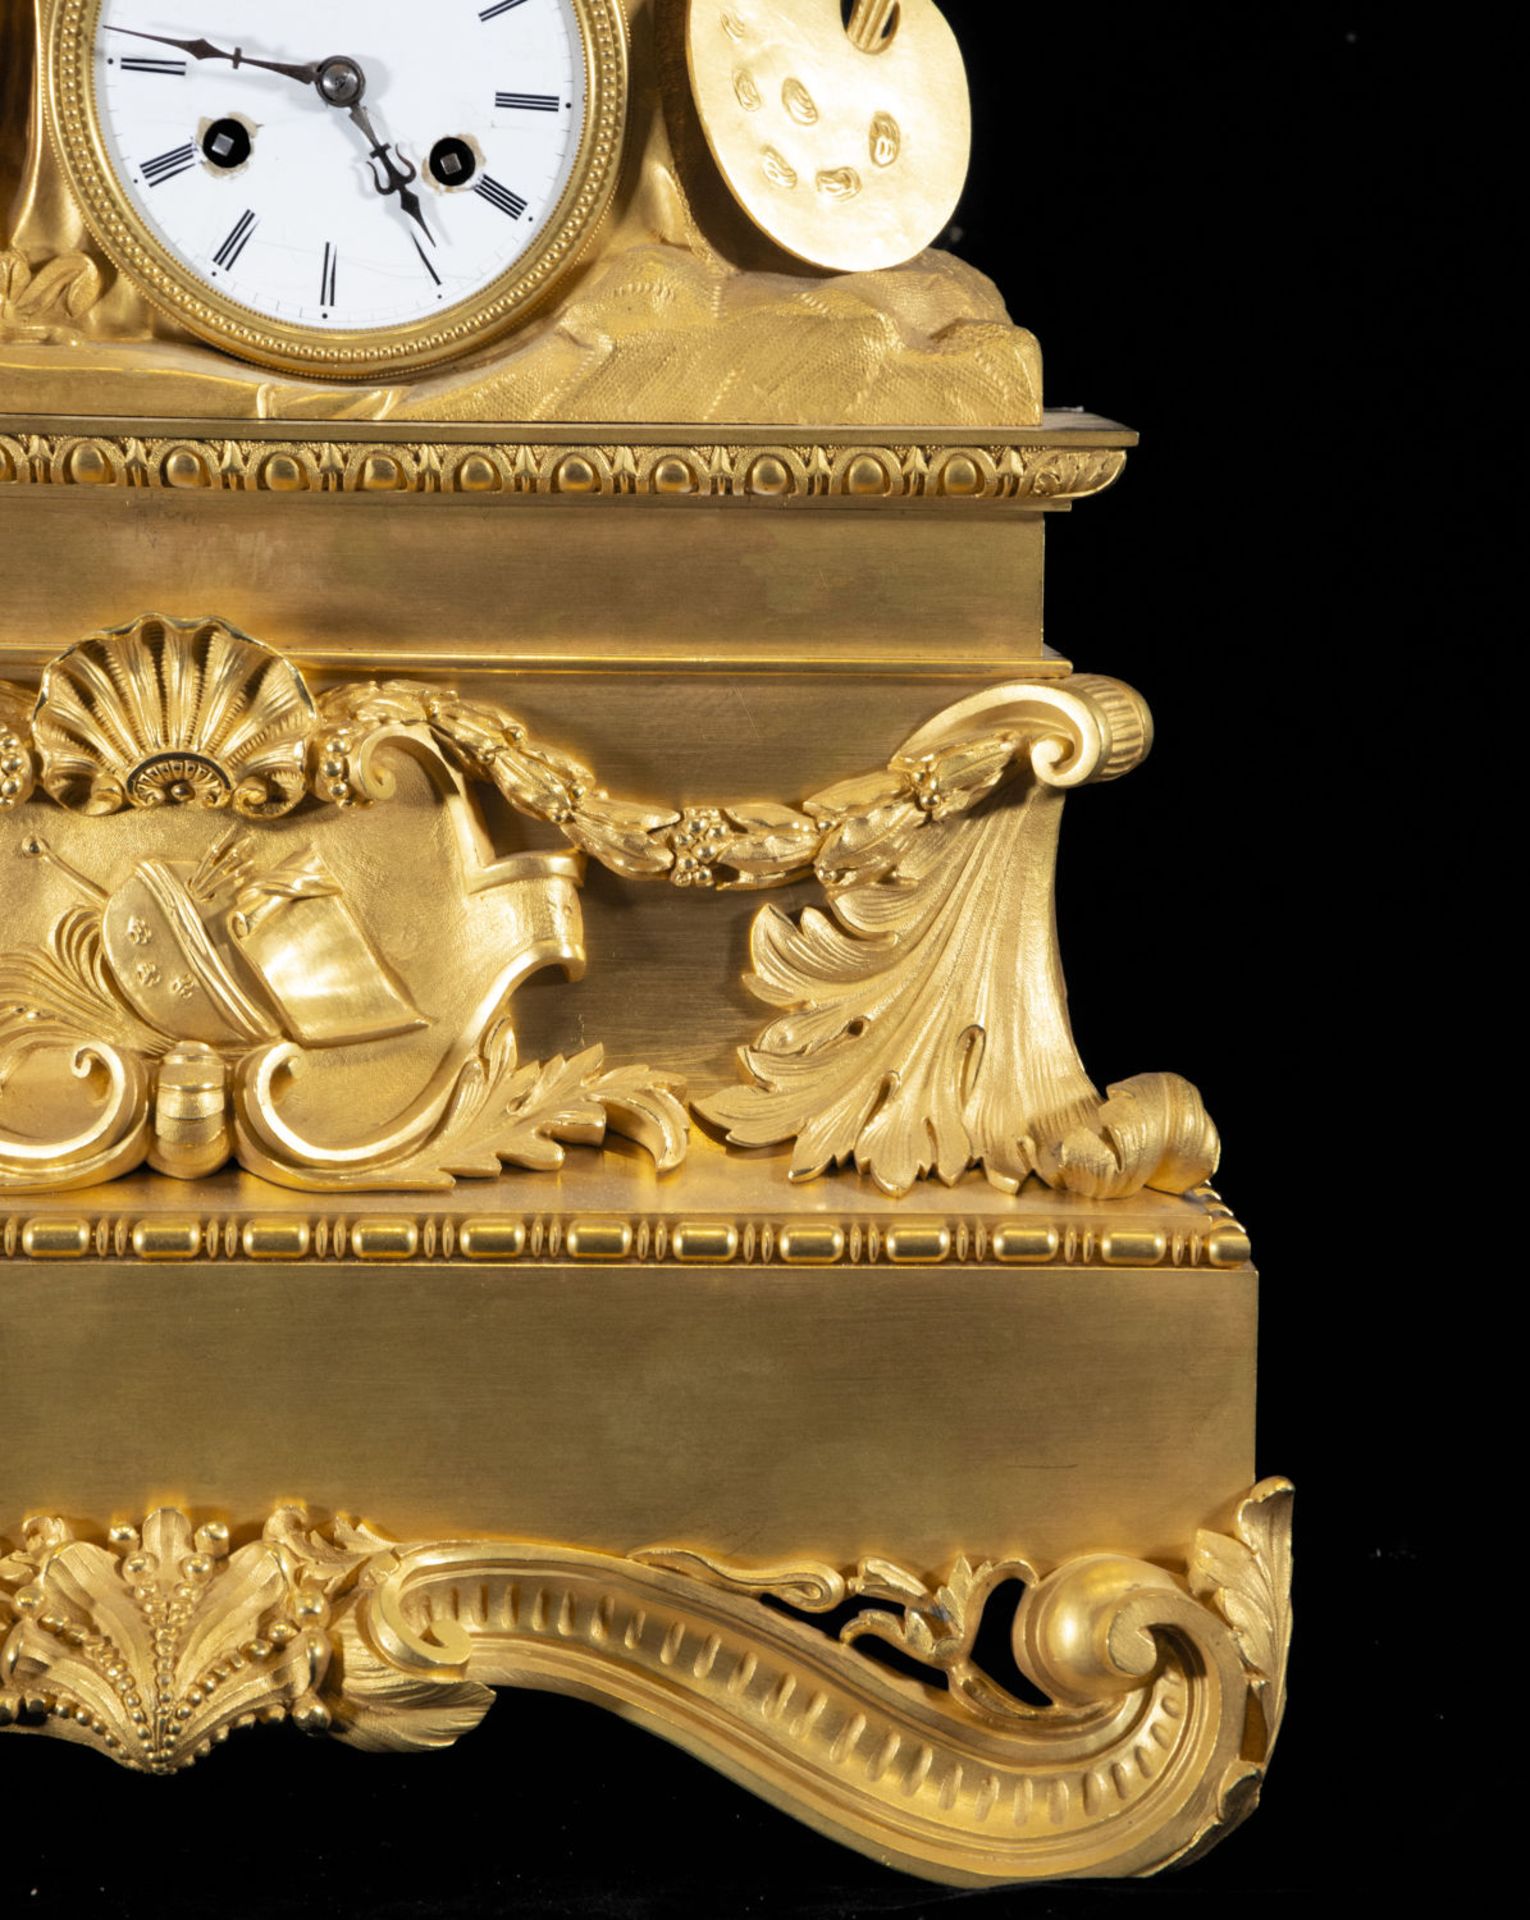 Large Empire table clock with the motif of Michelangelo Buonarroti, 19th century French school - Image 3 of 8